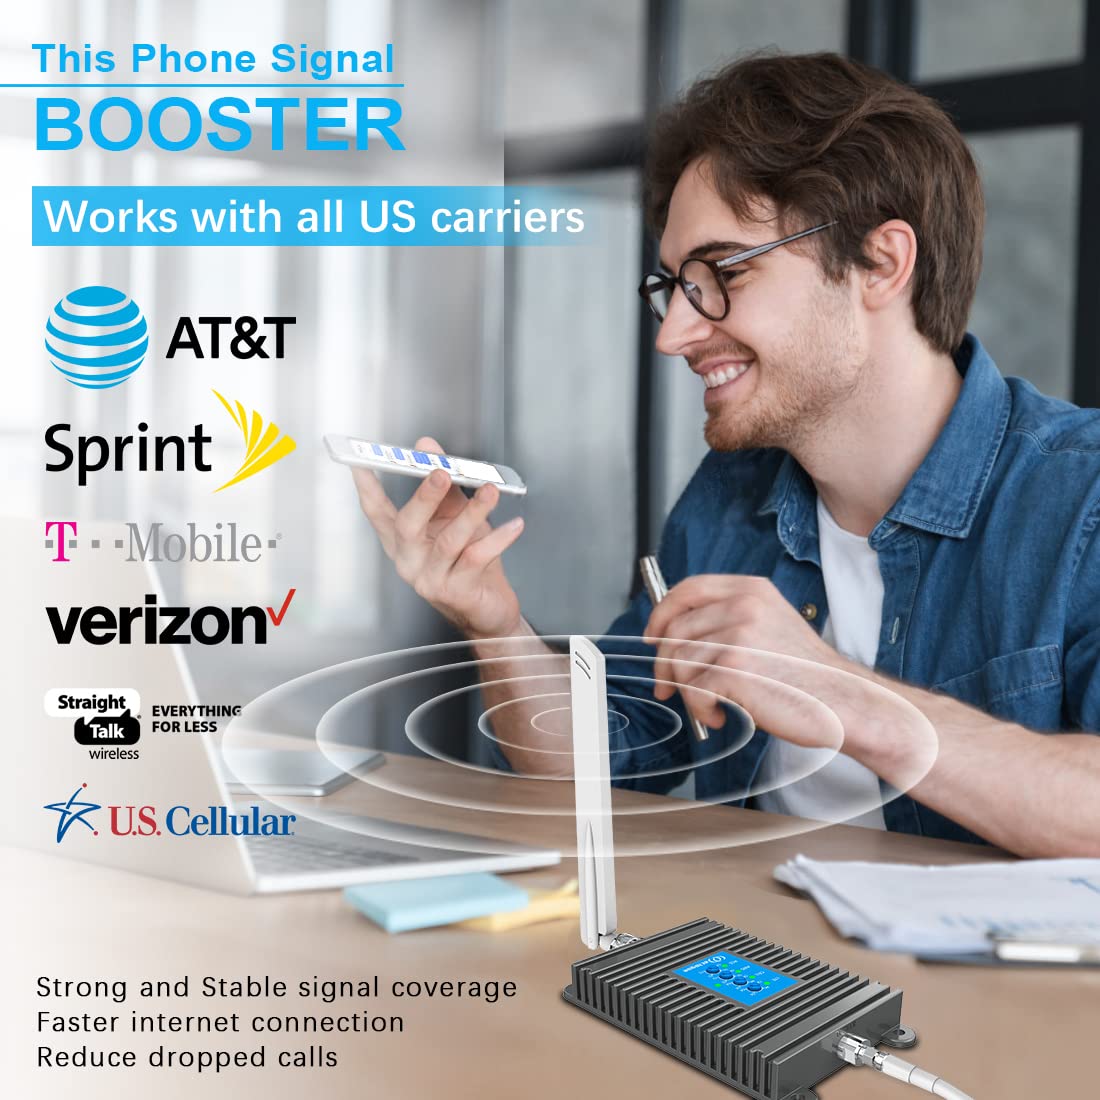 Home Cell Phone Signal Booster for All US Carriers Verizon ATT 5G 4G LTE Cell Signal Booster Band 2,4,5,12,13,17,25,66 Signal Amplifier Omni-Directional Antenna Kits, Covers up to 4,000 sq.ft